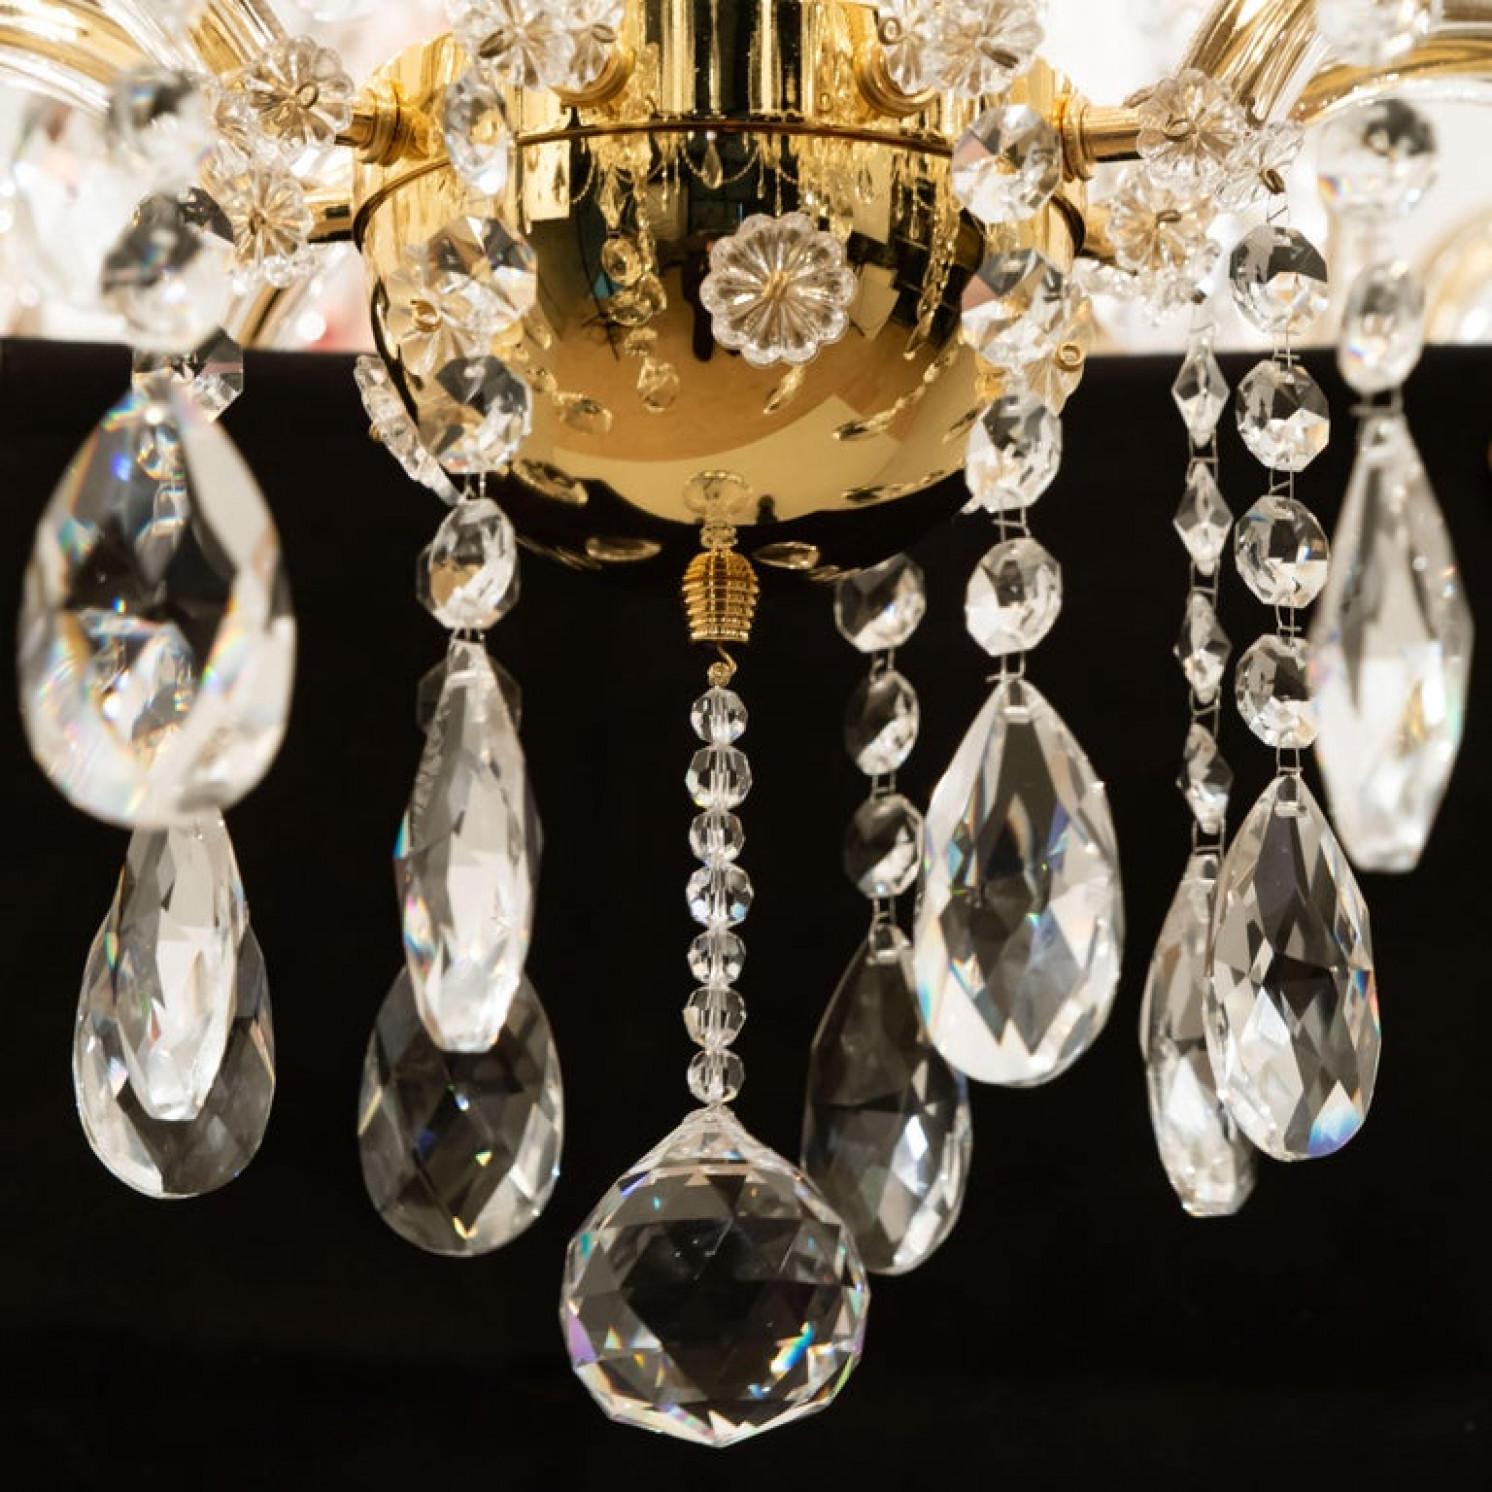 Huge High-End XXL Maria Theresa Gold Plated Swarovski Chandelier For Sale 11